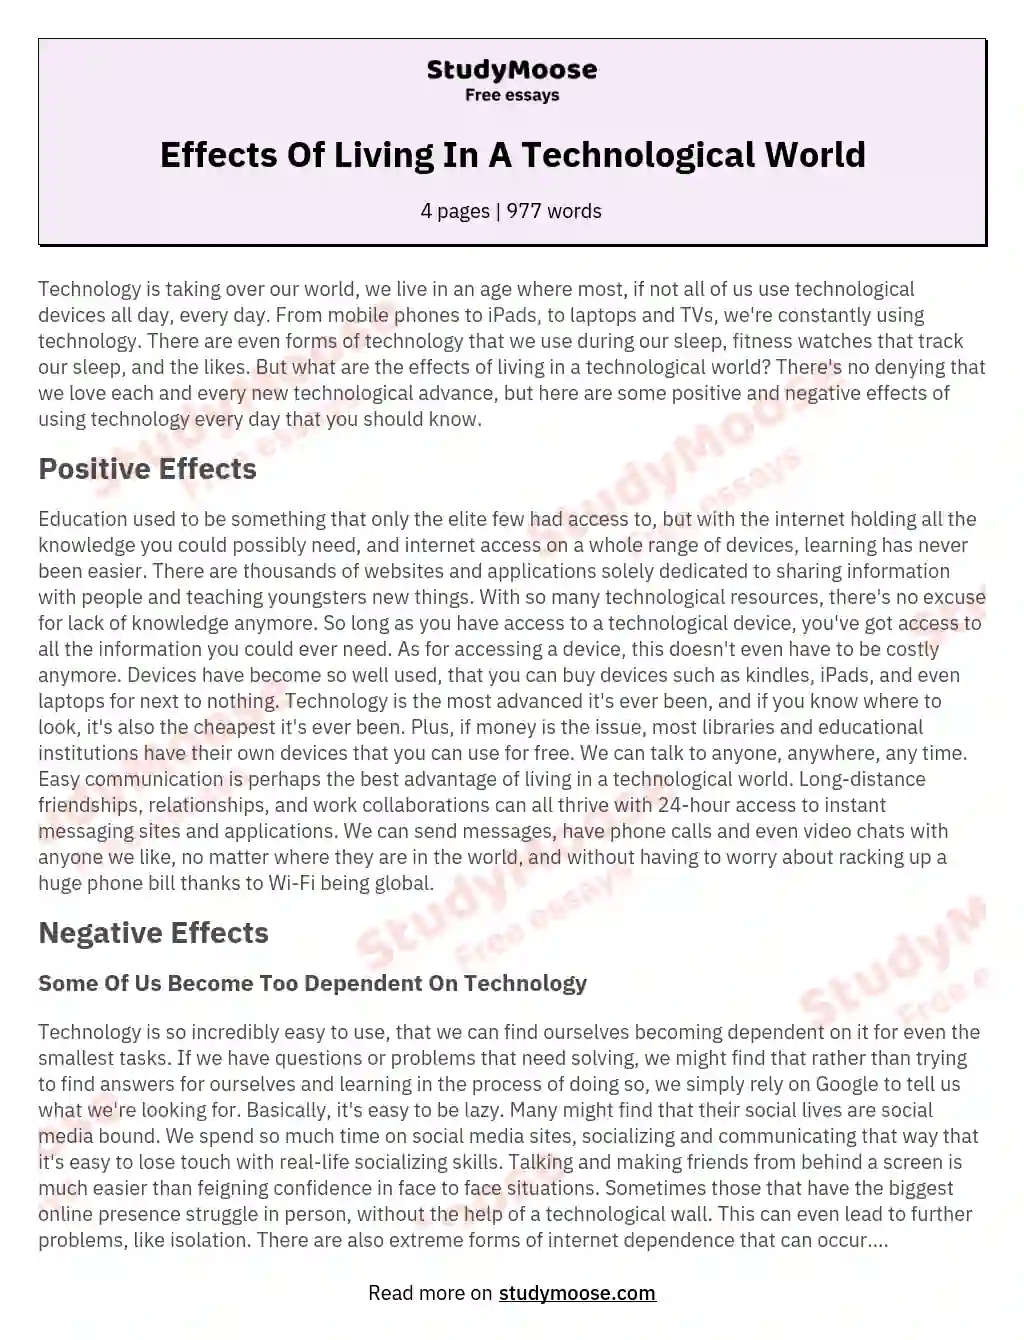 Effects Of Living In A Technological World essay